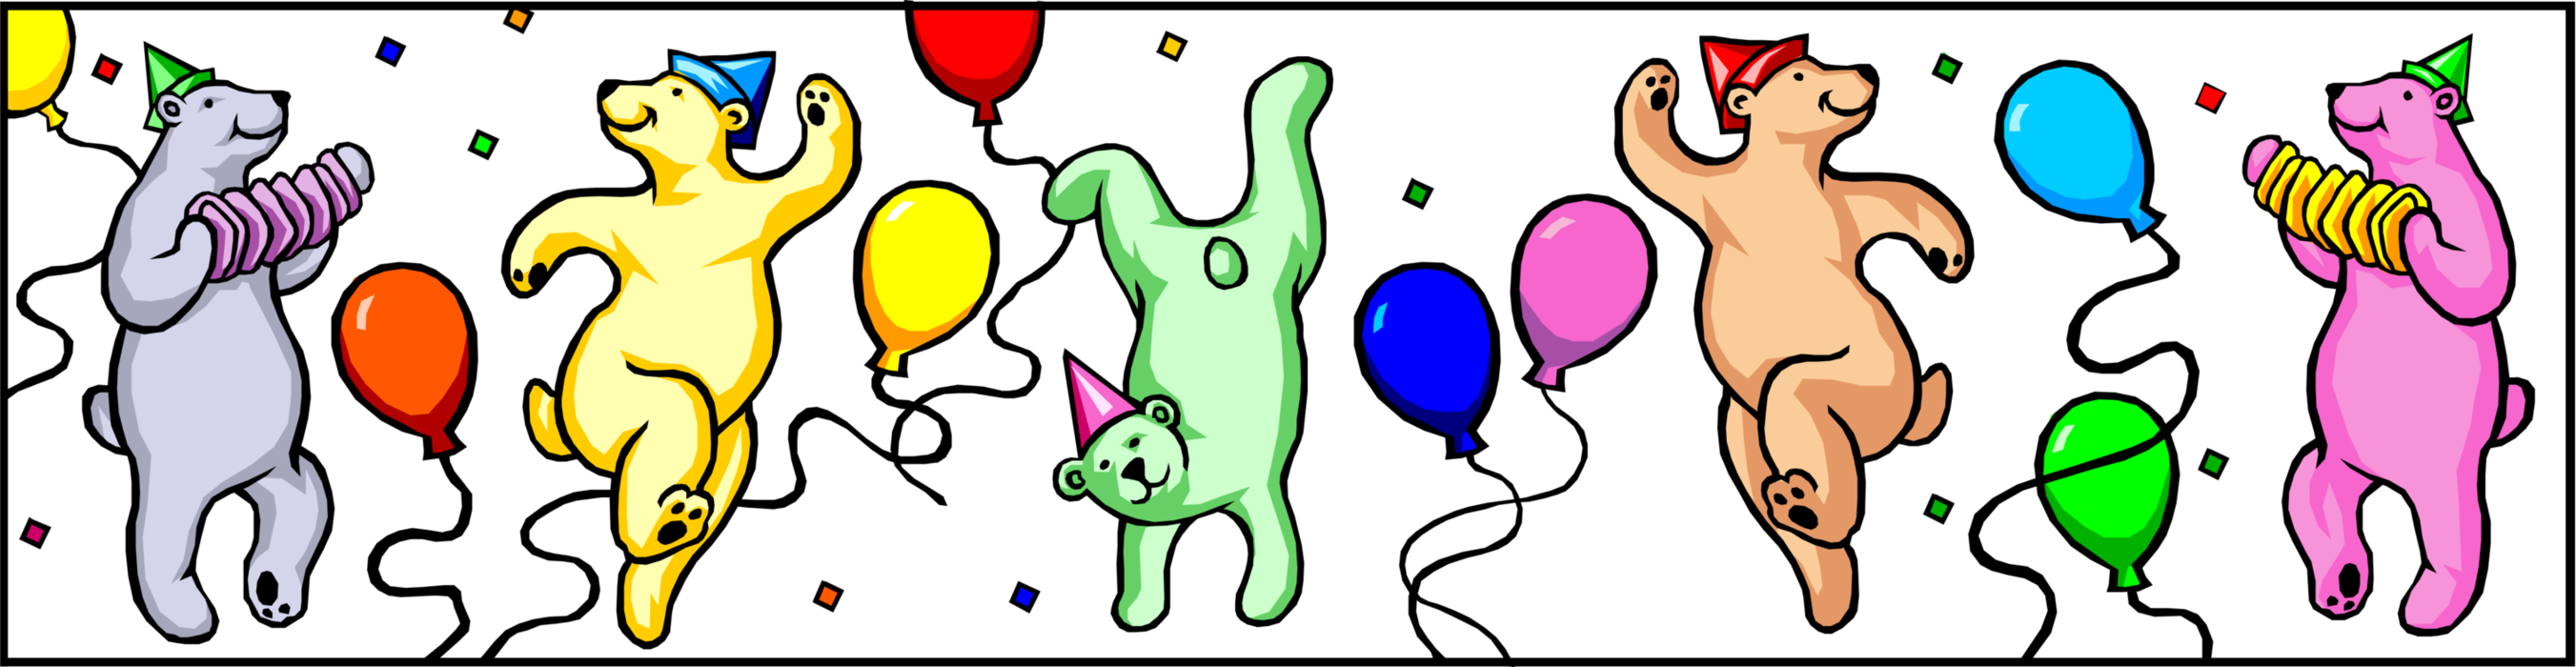 Vector Illustration of Dancing Bears with Party Hats and Balloons Border